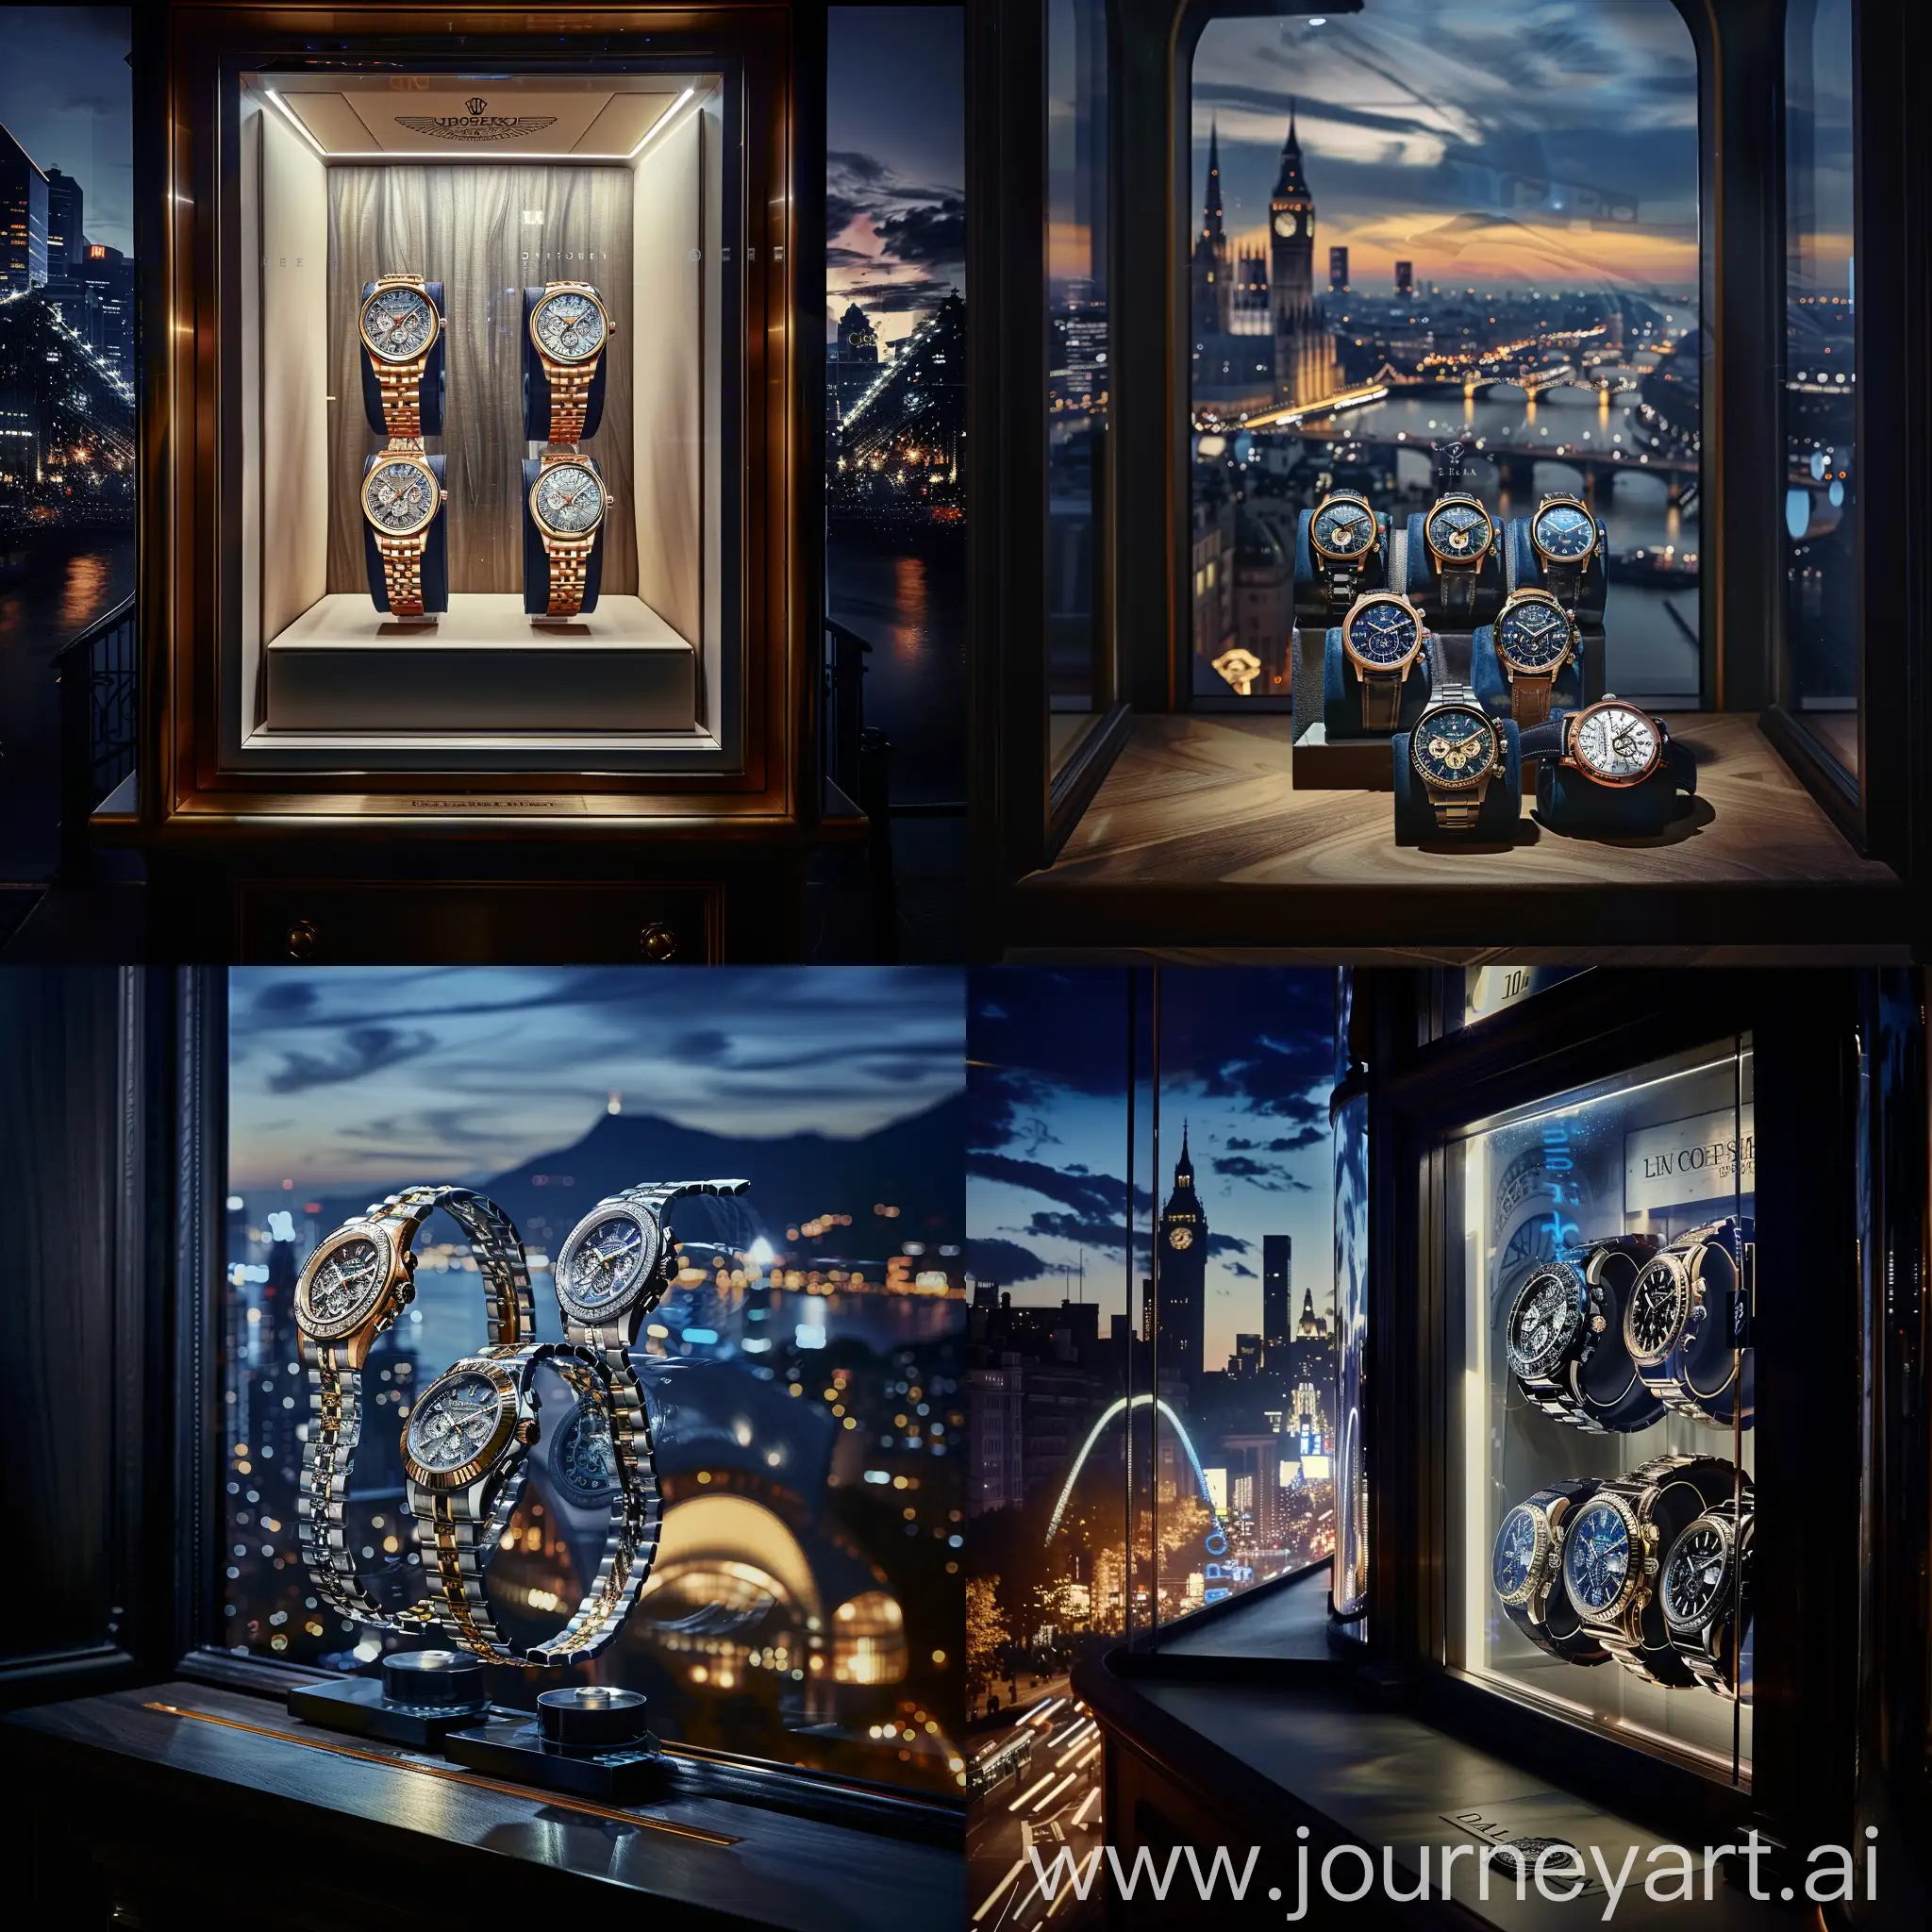 Craft a striking image that captures the timeless elegance of luxury watches showcased in a watch dealer's boutique window, set against a backdrop of bustling city lights or serene natural scenery. Highlight the intricate details and craftsmanship of the watches, evoking a sense of sophistication and allure that resonates with discerning watch enthusiasts. Use lighting and composition to convey the prestige and exclusivity associated with these coveted timepieces, enticing viewers to explore the dealer's collection further.